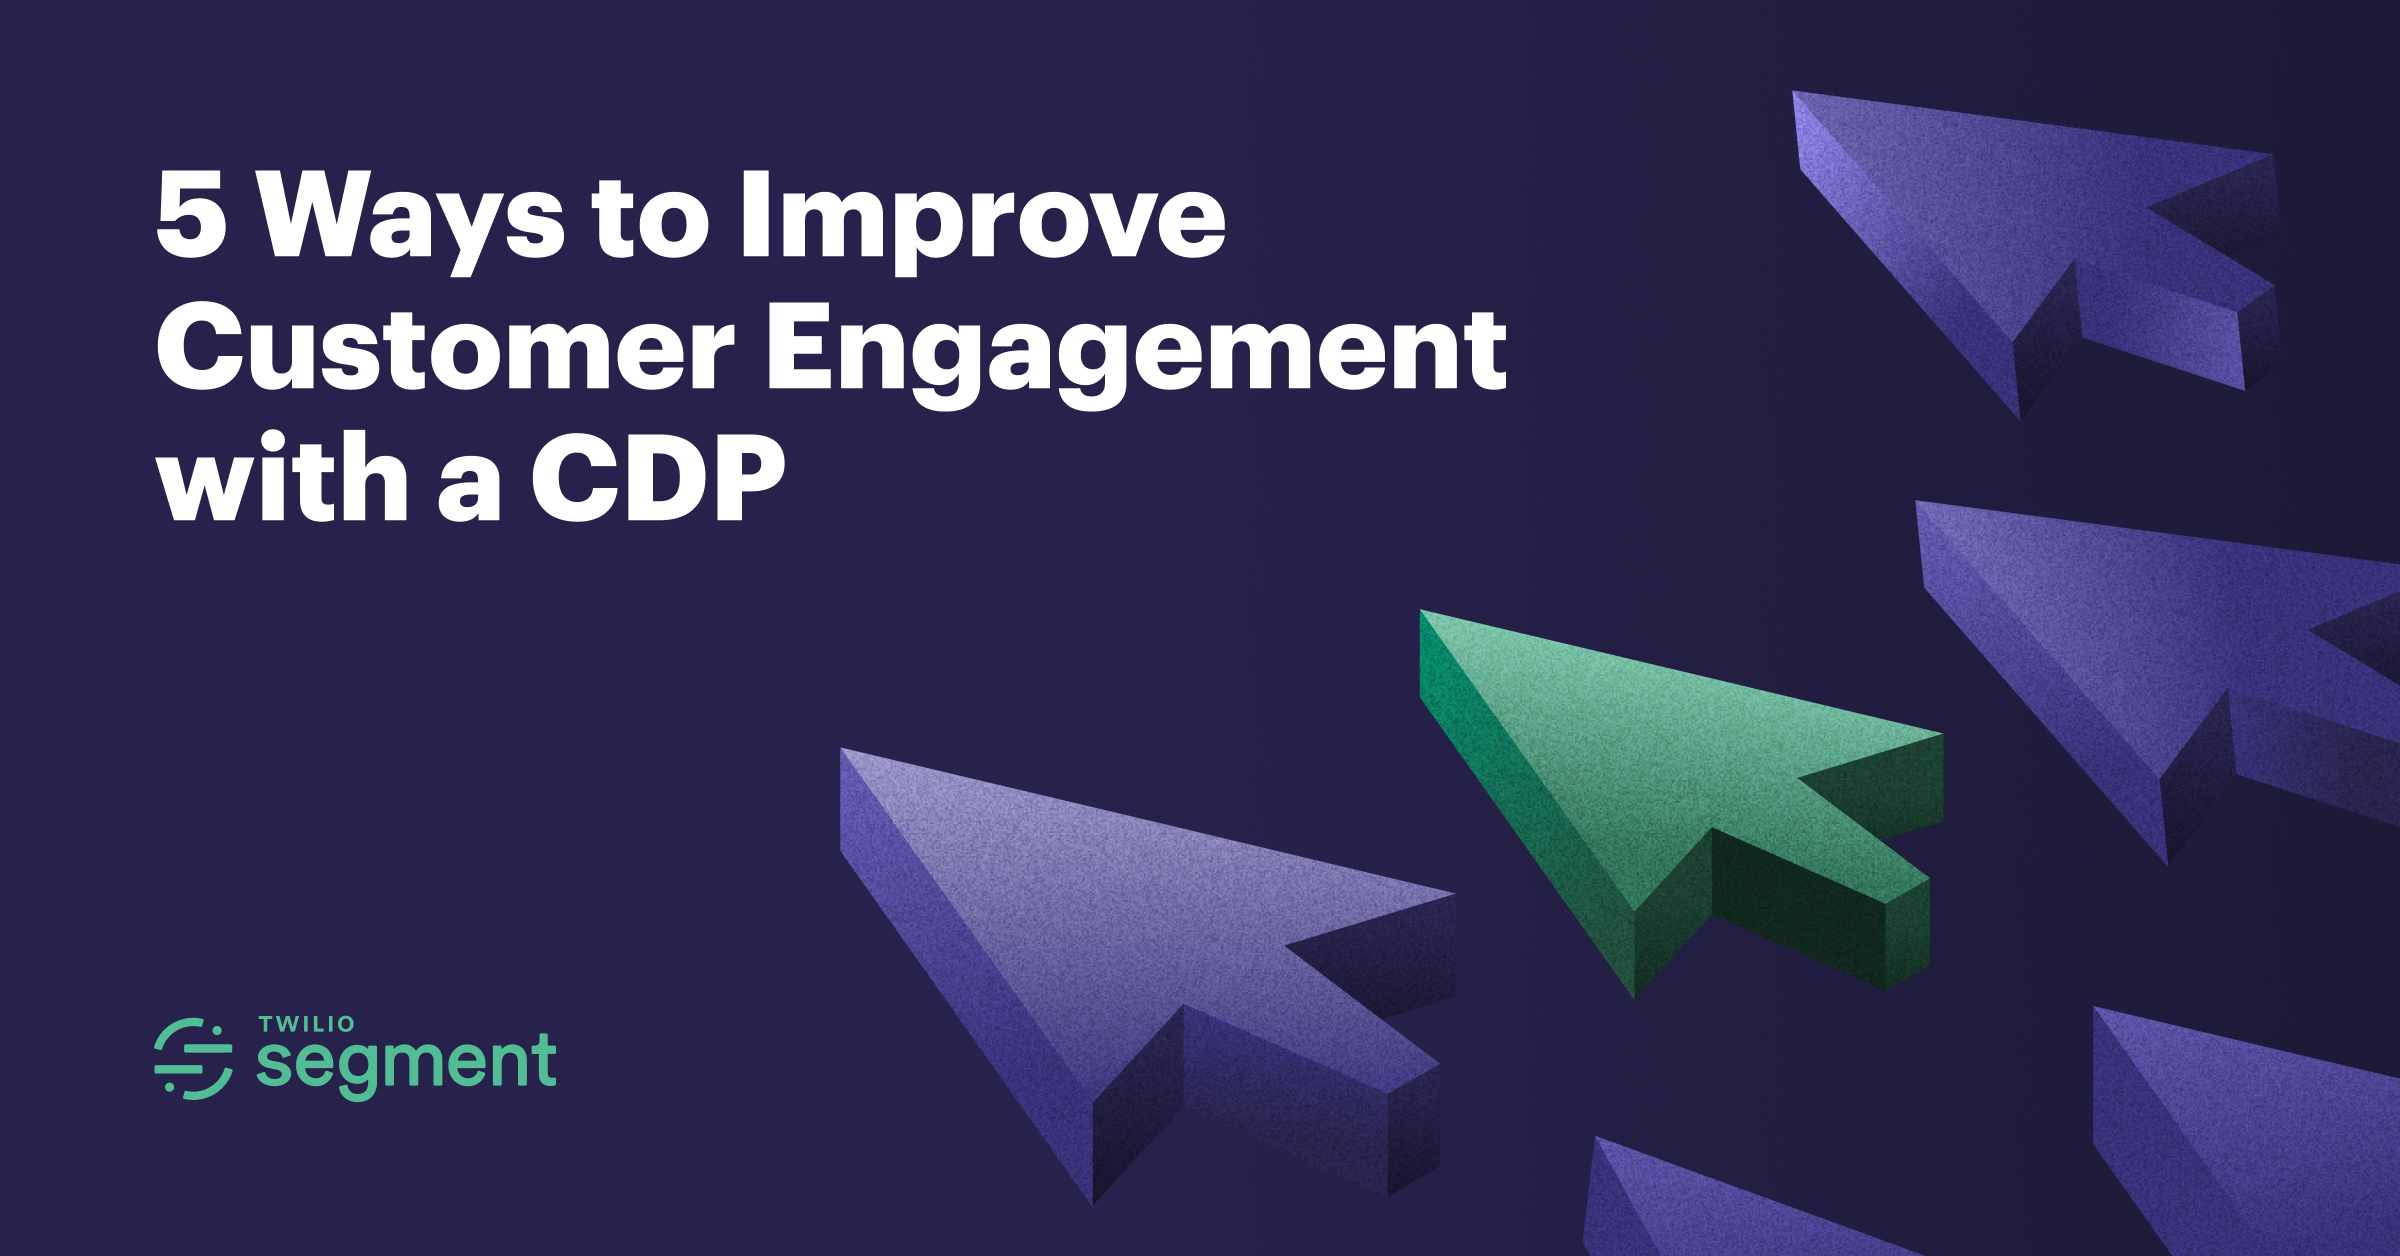 5 Ways to Improve Customer Engagement with a CDP